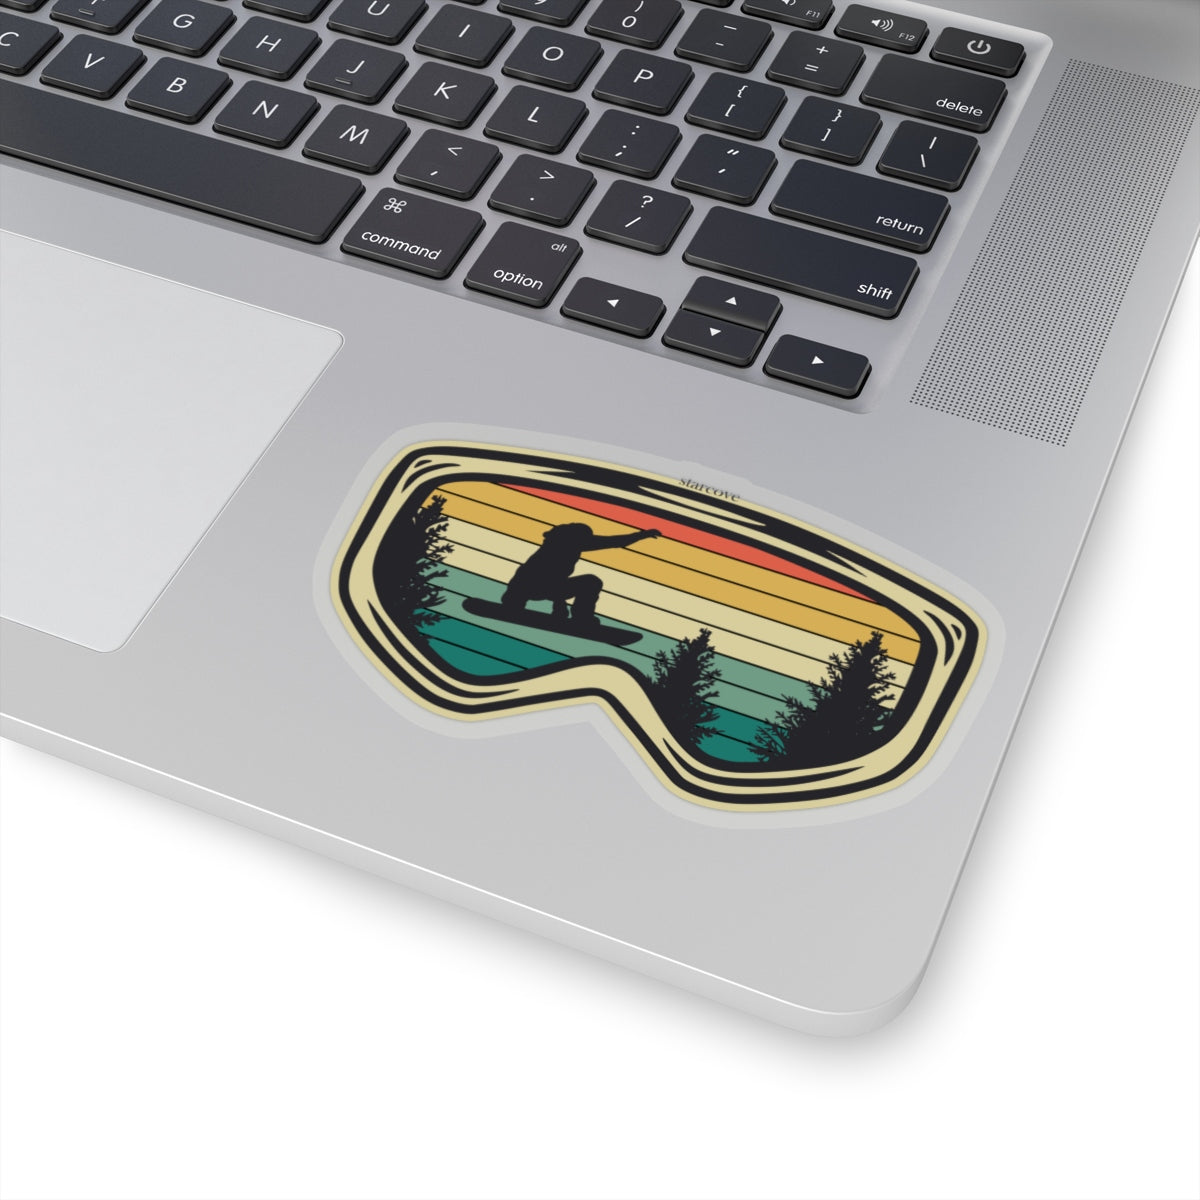 Snowboarder Jumping Sticker, Goggles Vintage Retro Mountain Boarding  Laptop Vinyl Waterbottle Tumbler Car Bumper Wall Mural Decal Starcove Fashion